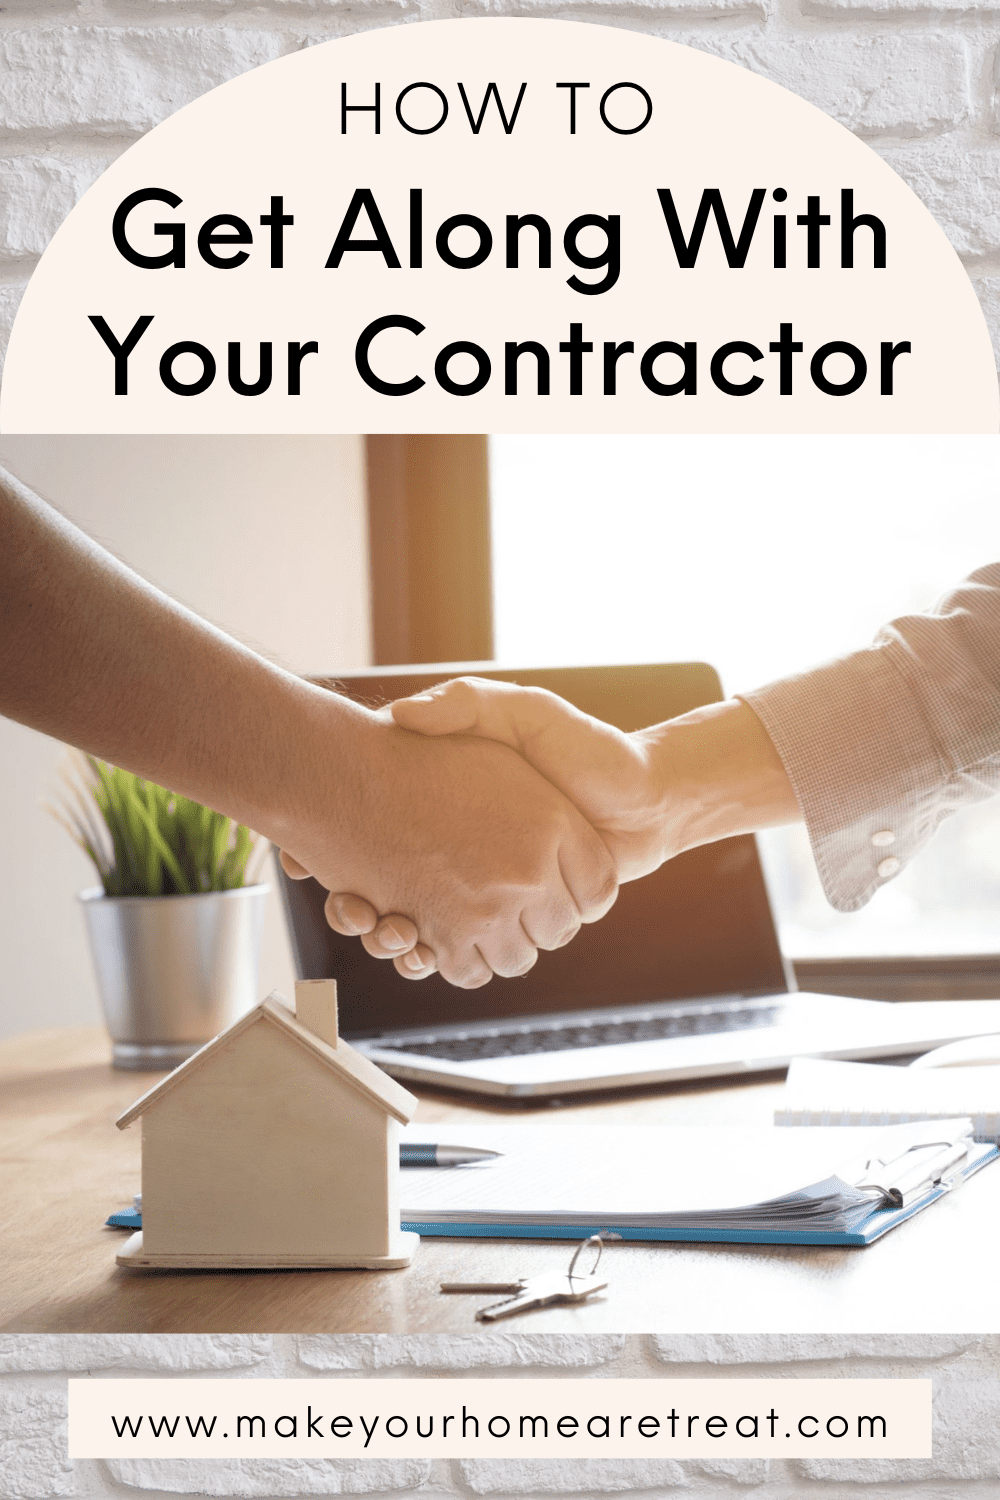 How to get along with your contractor